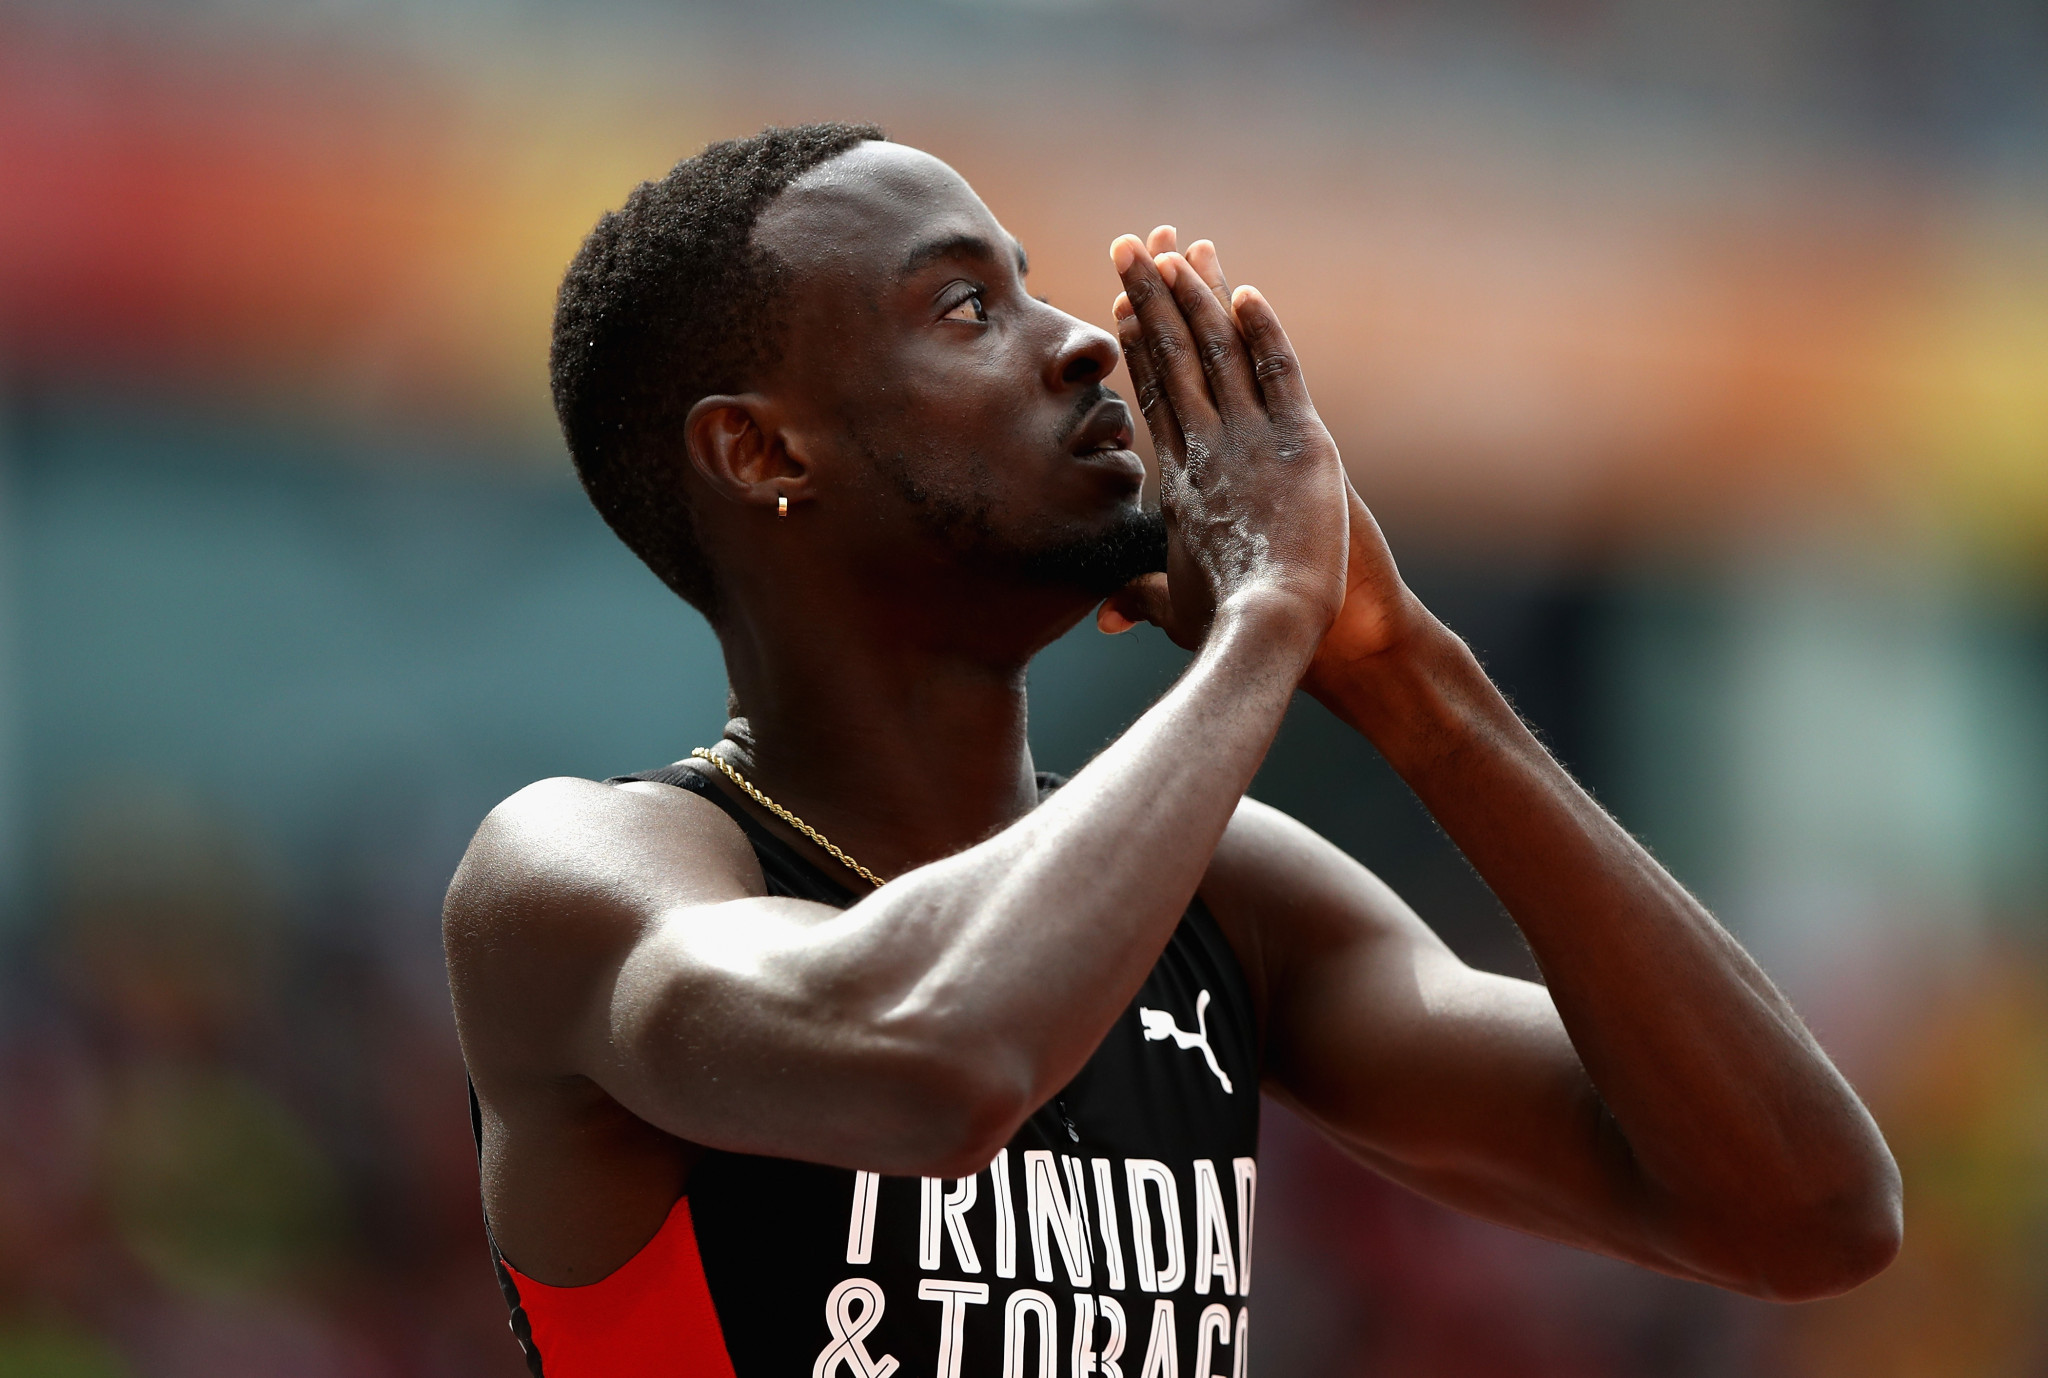 Jereem Richards also topped the podium for Trinidad and Tobago at Gold Coast 2018 ©Getty Images